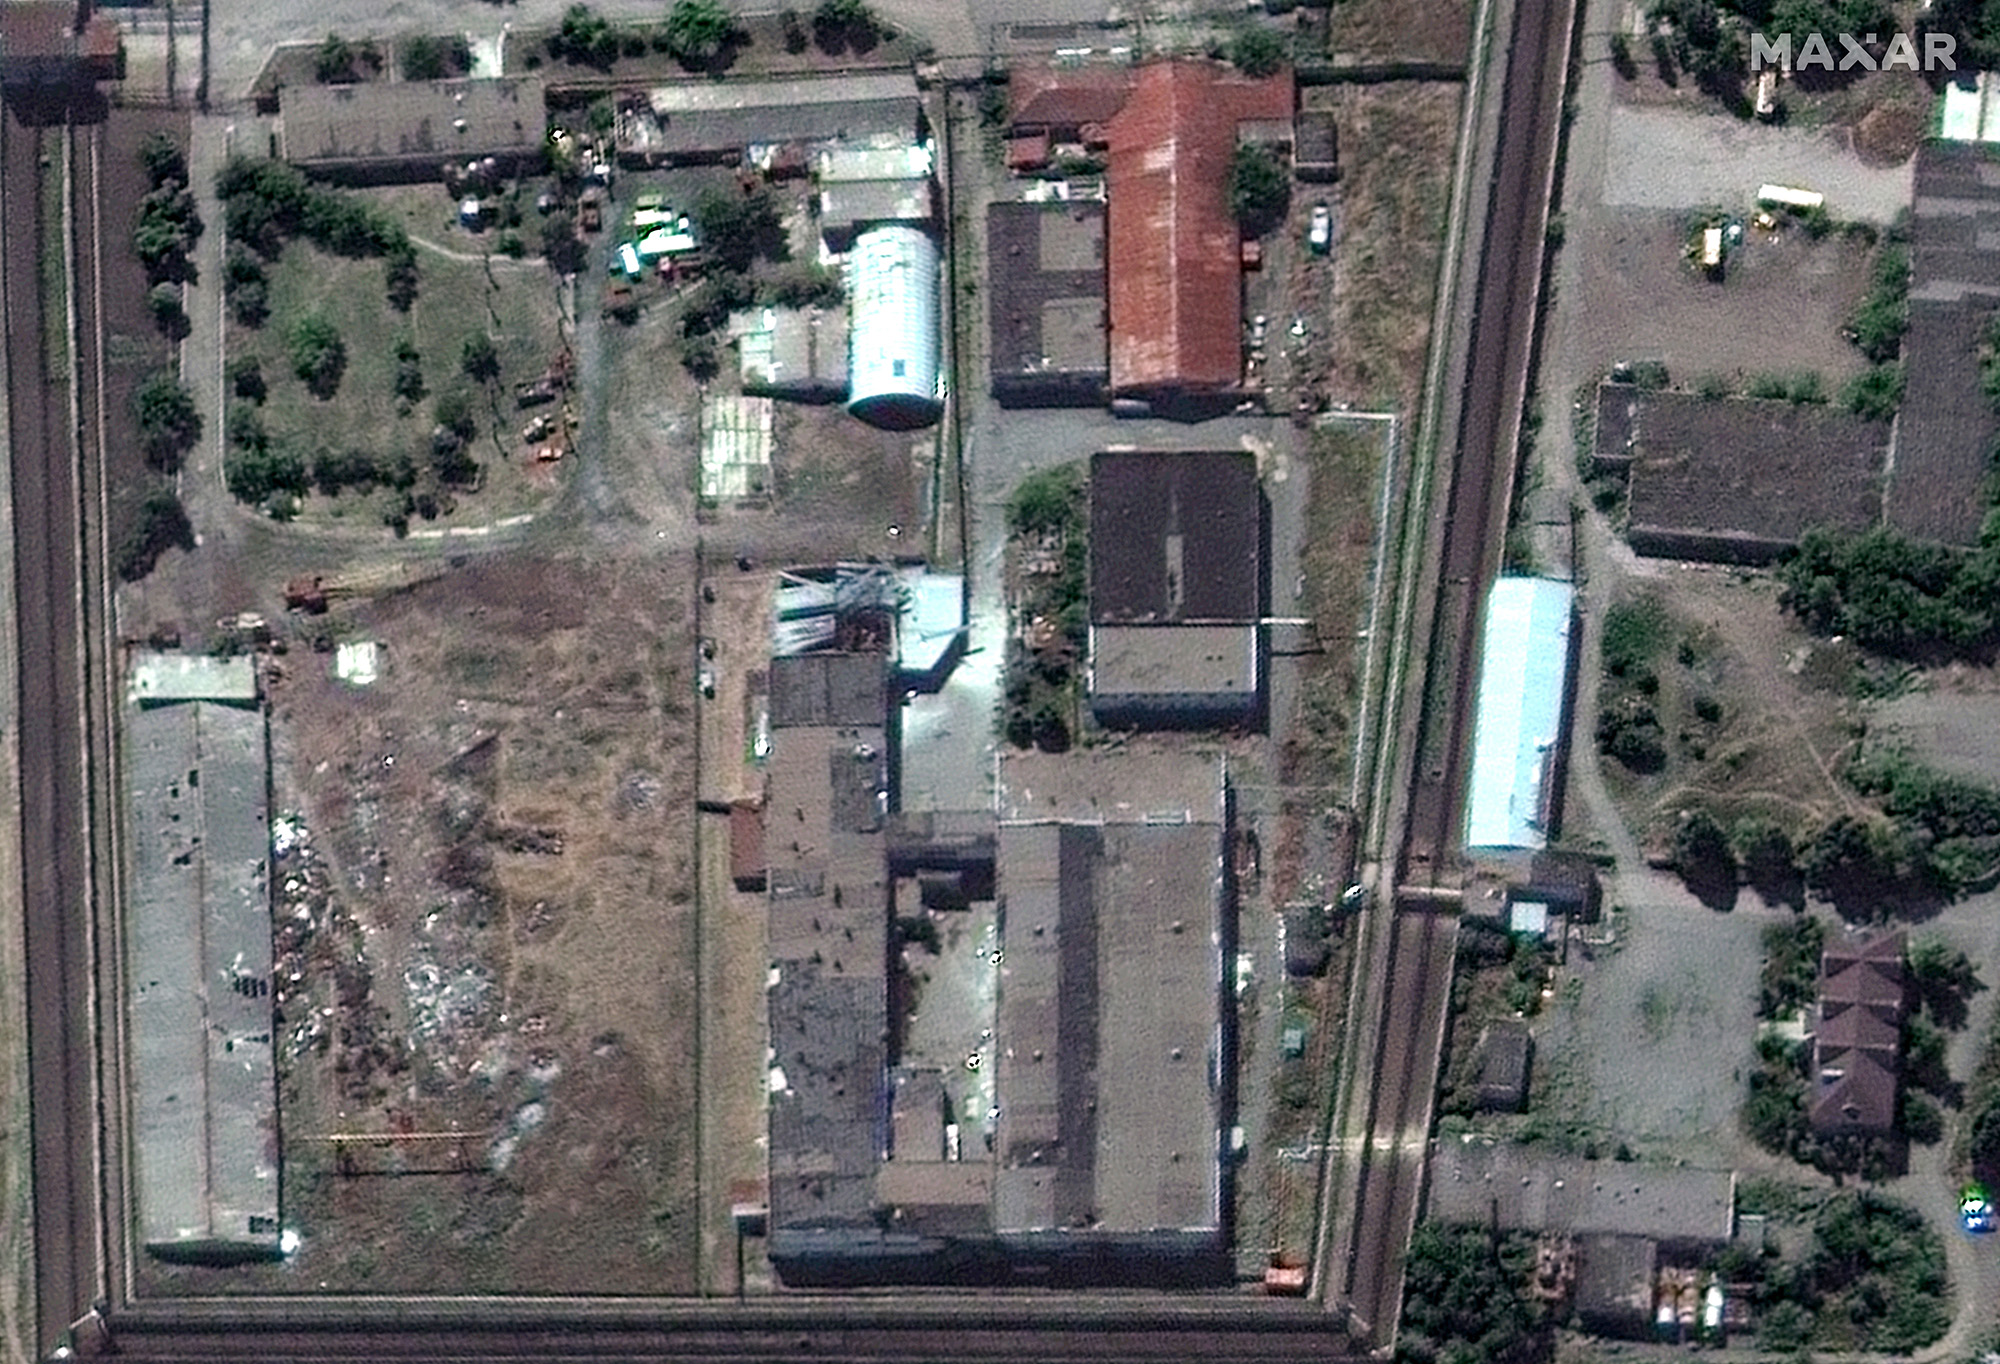 Olenivka prison in Donetsk seen in a satellite photo provided by Maxar Technologies on July 30, following the attack on the facility.